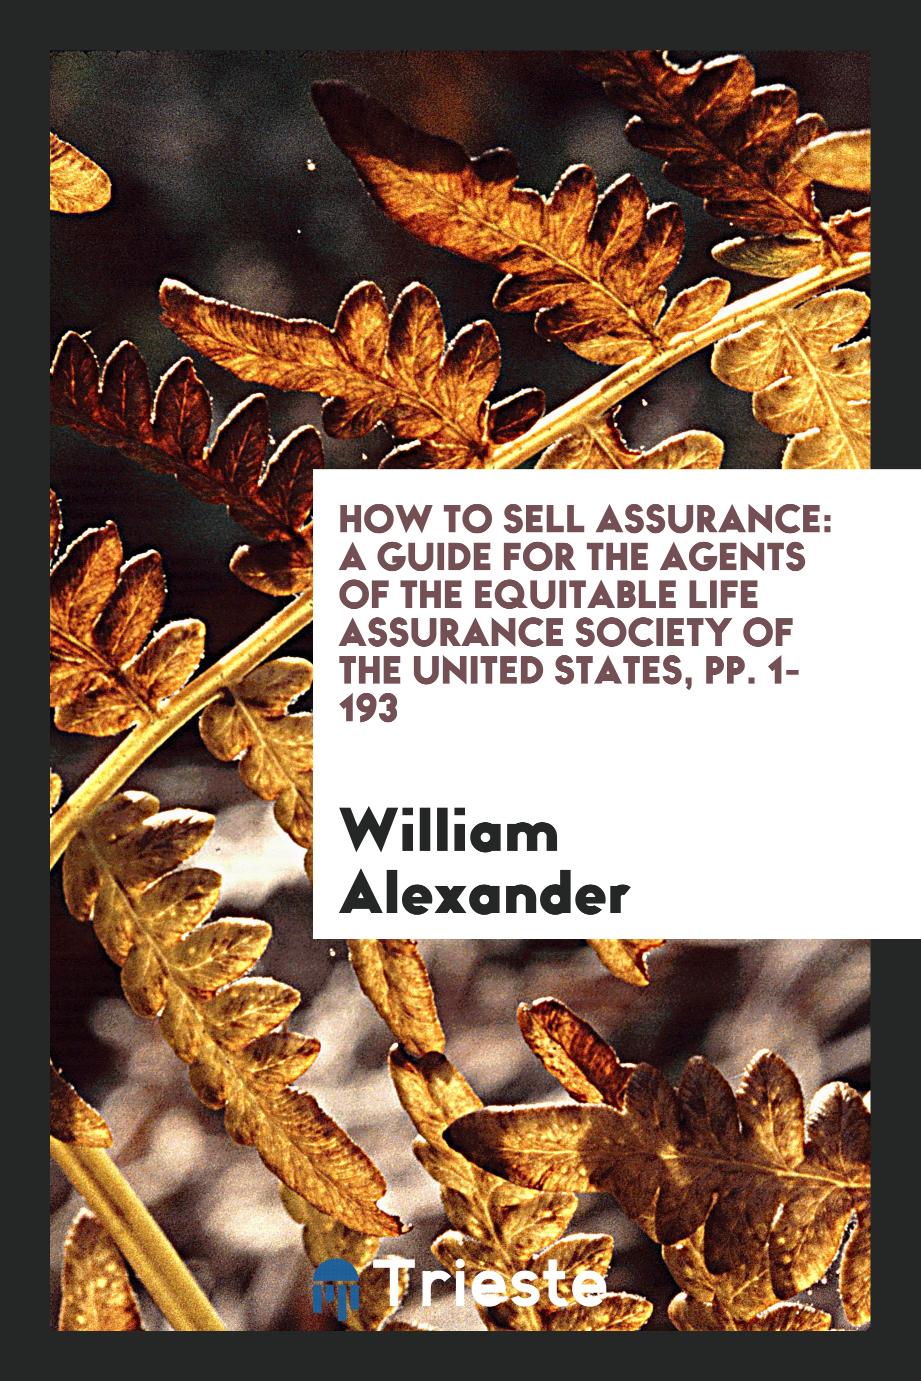 How to Sell Assurance: A Guide for the Agents of the Equitable Life Assurance Society of the United States, pp. 1-193